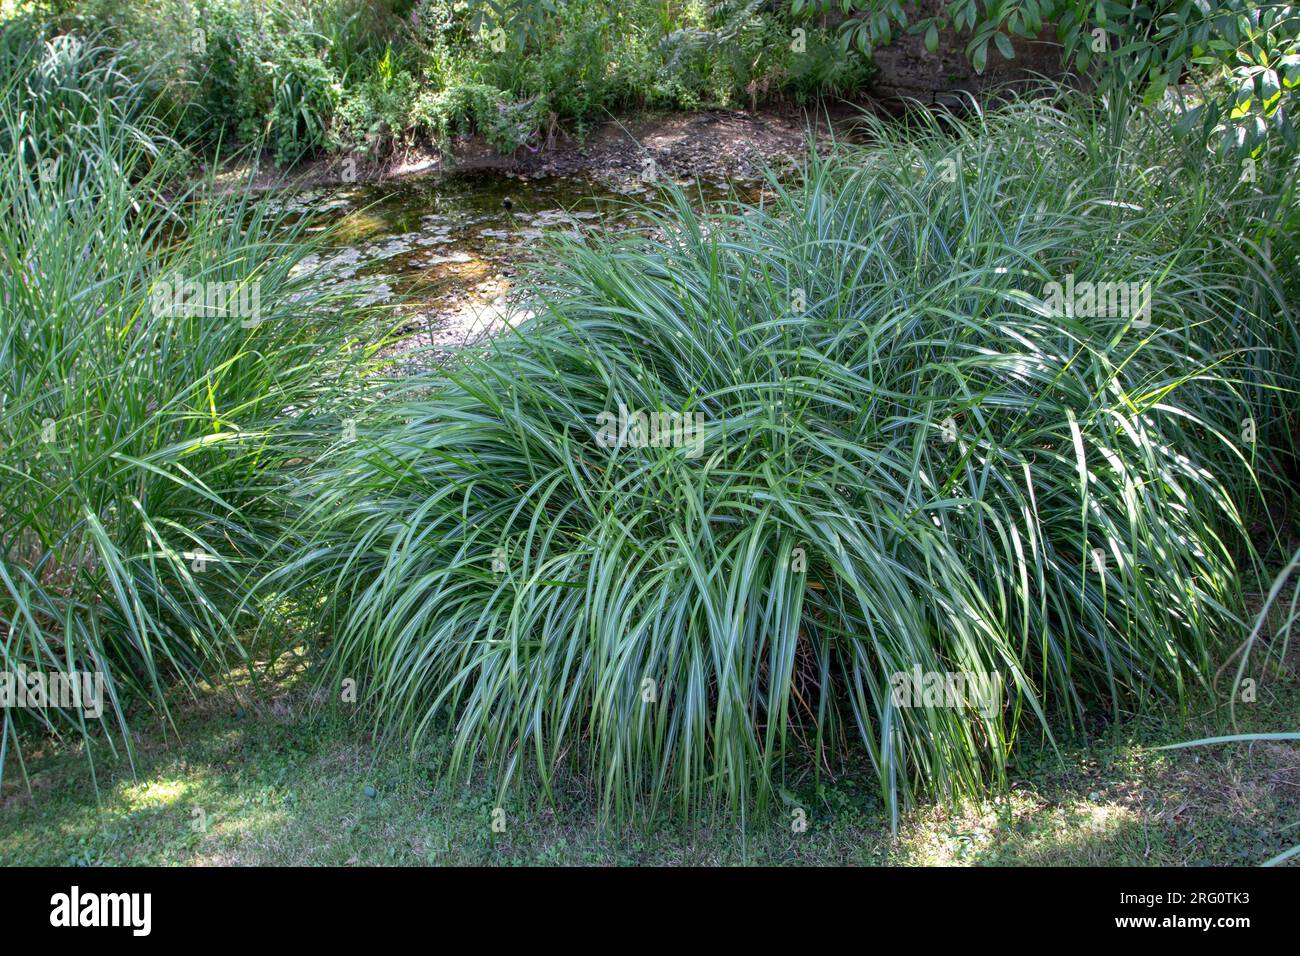 Miscanthus sinensis var zebrinus ornamental grass at the shady stream bank in the park. Zebra grass plant with striped arching foliage. Stock Photo